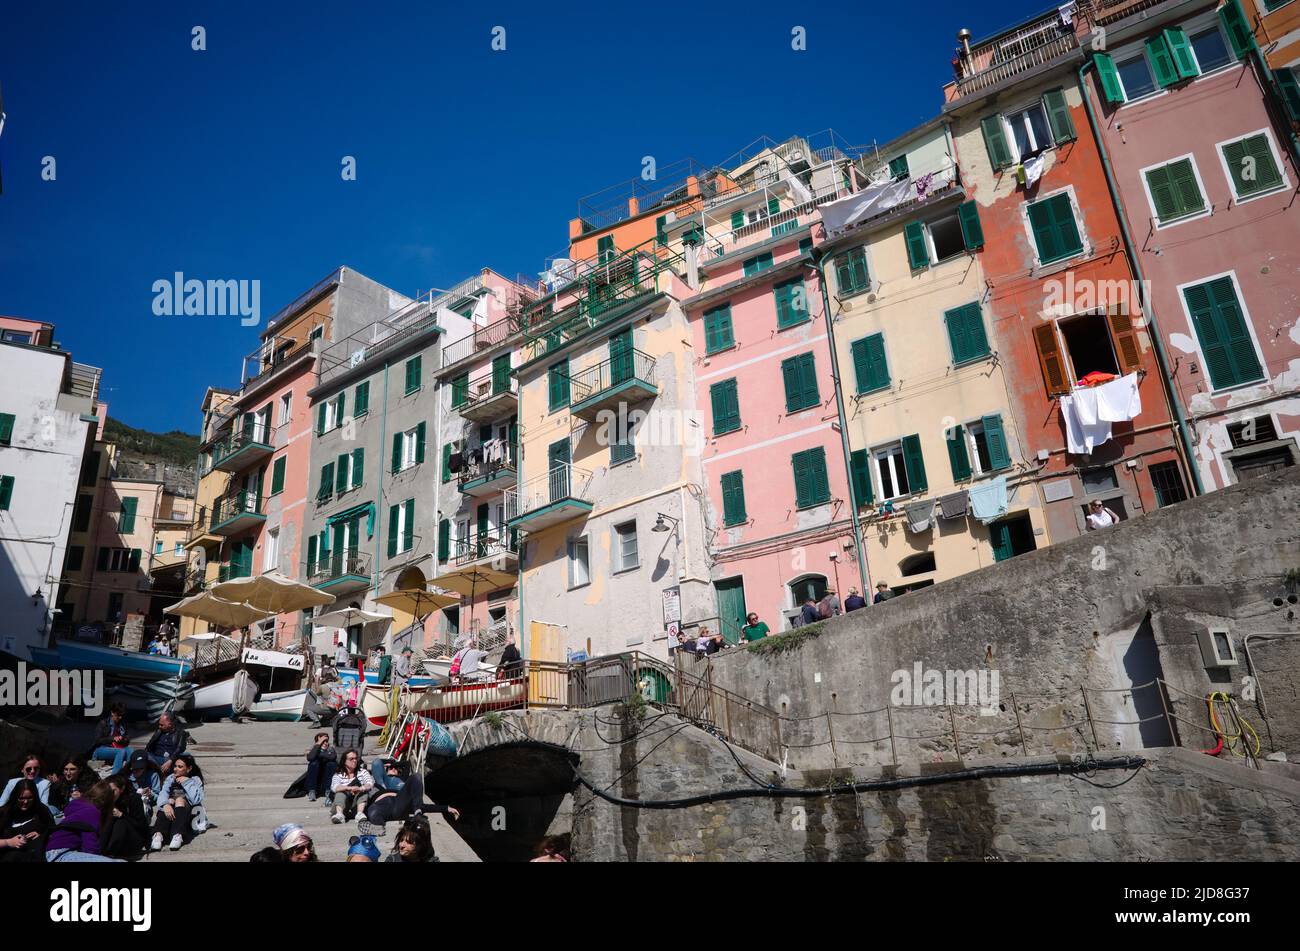 Riomaggiore, Liguria, Italy - April, 2022: Traditional Mediterranean Italian residential buildings with weathered colorful facades Stock Photo